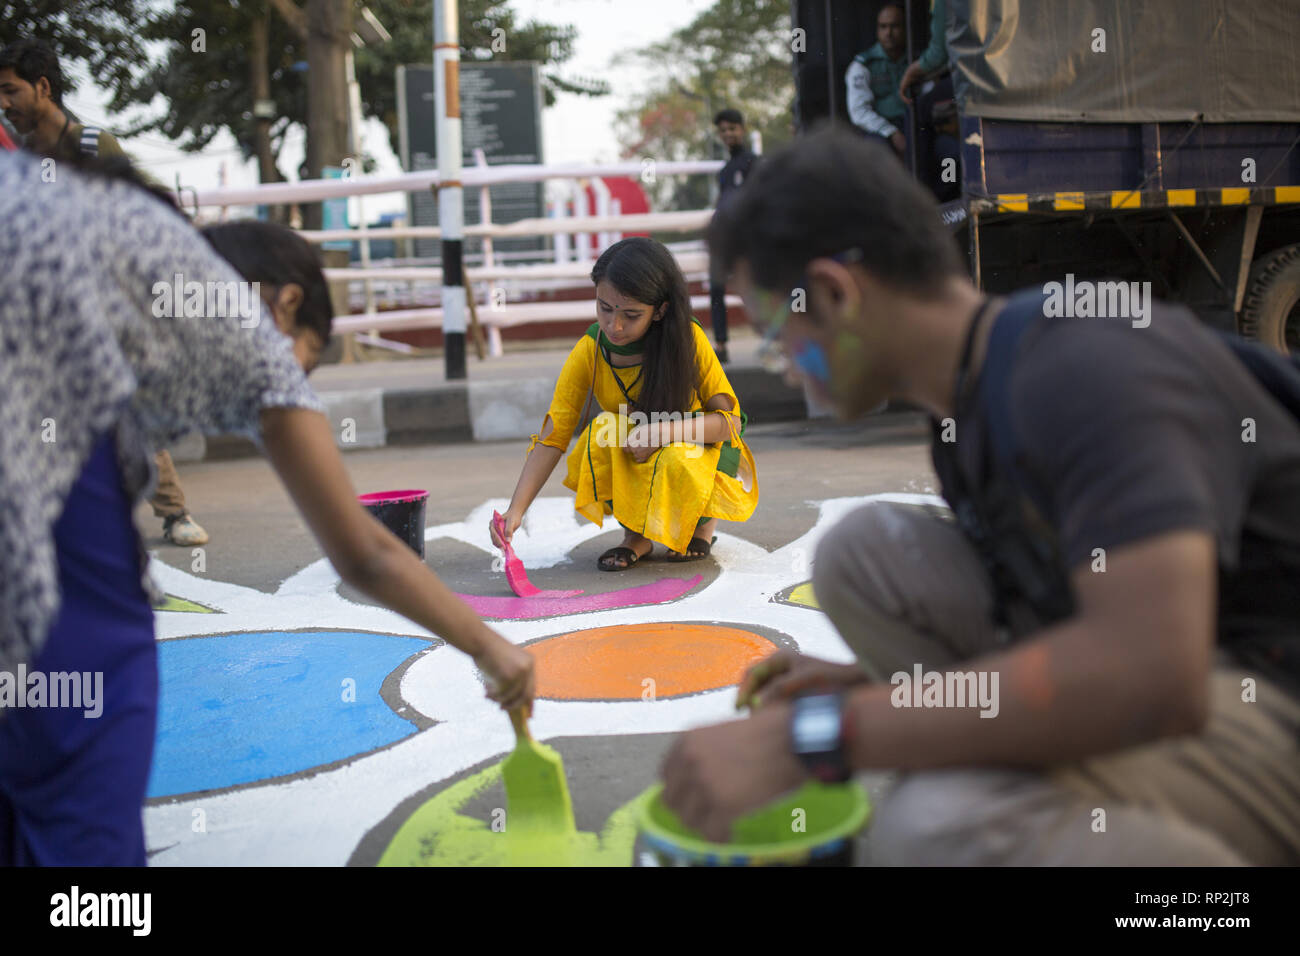 Dhaka, Bangladesh. 20th Feb, 2019. FEBRUARY 20 : Bangladeshi students paints on the street as part of the decoration for the International Mother Language Day celebration in front of the language matyrs monument in Dhaka, Bangladesh on February 20, 2019.The nation will pay tribute to the Bangla language movement martyrs who sacrificed their life for their mother tongue in 1952, while the United Nations Educational Scientific and Cultural Organization (UNESCO) declared 21 February as the International Mother Language Day. Credit: Zakir Hossain Chowdhury/ZUMA Wire/Alamy Live News Stock Photo